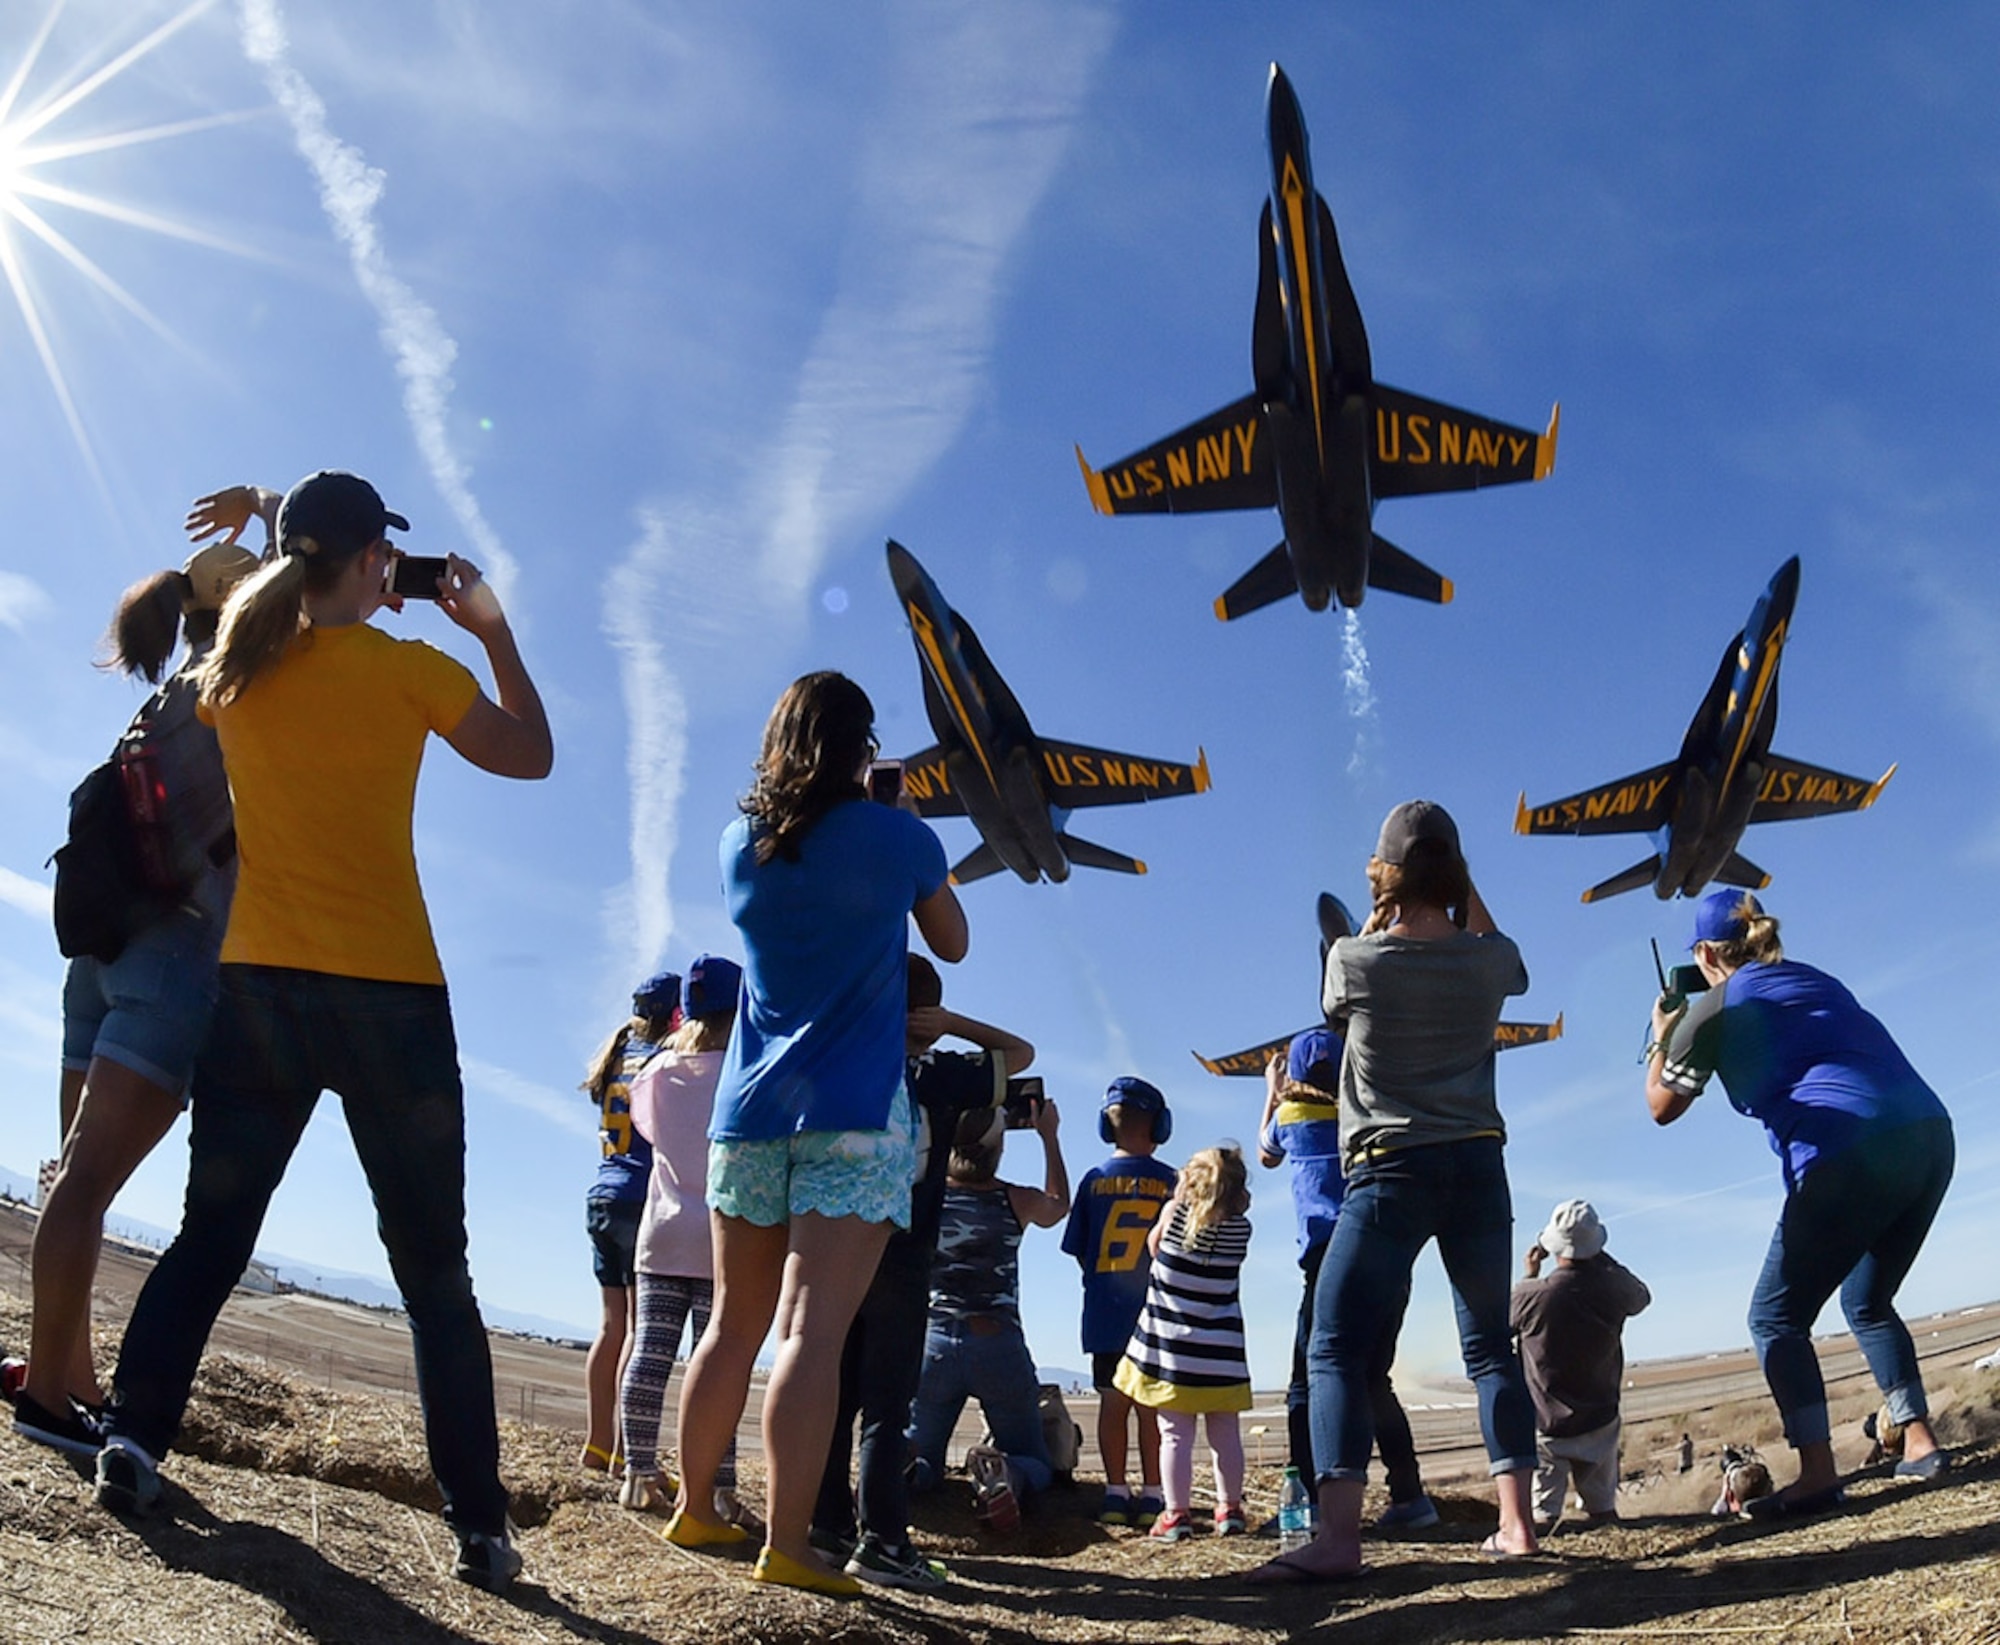 U.S. Navy Blue Angels fly over an excited crowd during a recent airshow.  The Blue Angels are the Navy's premiere aerial demonstration team and perform at air shows around the world.